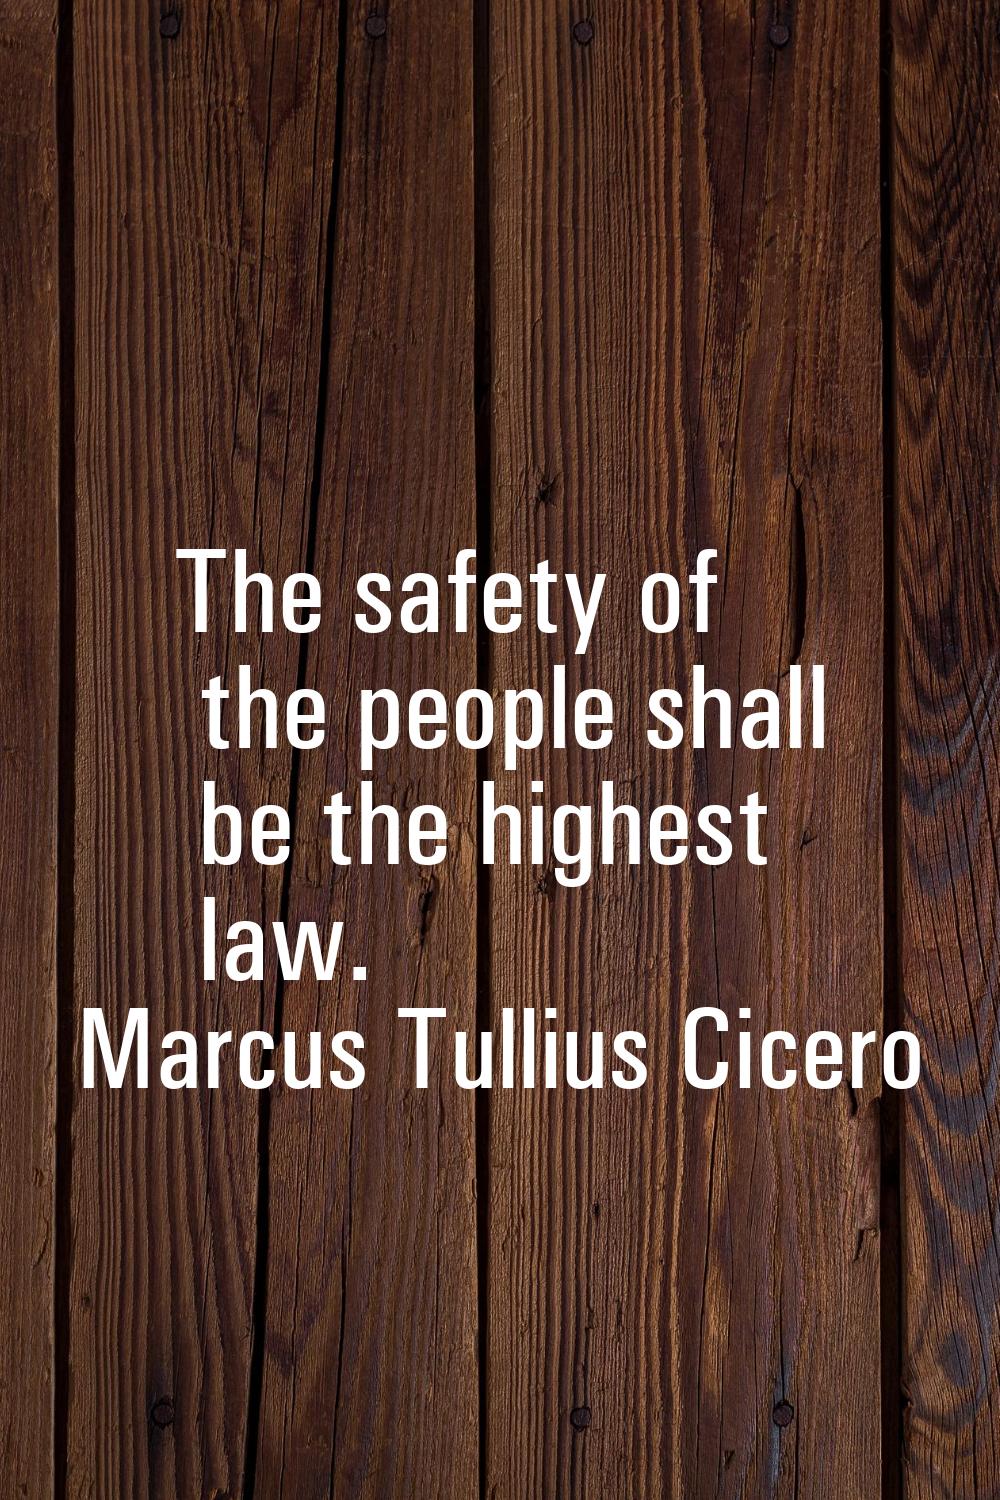 The safety of the people shall be the highest law.